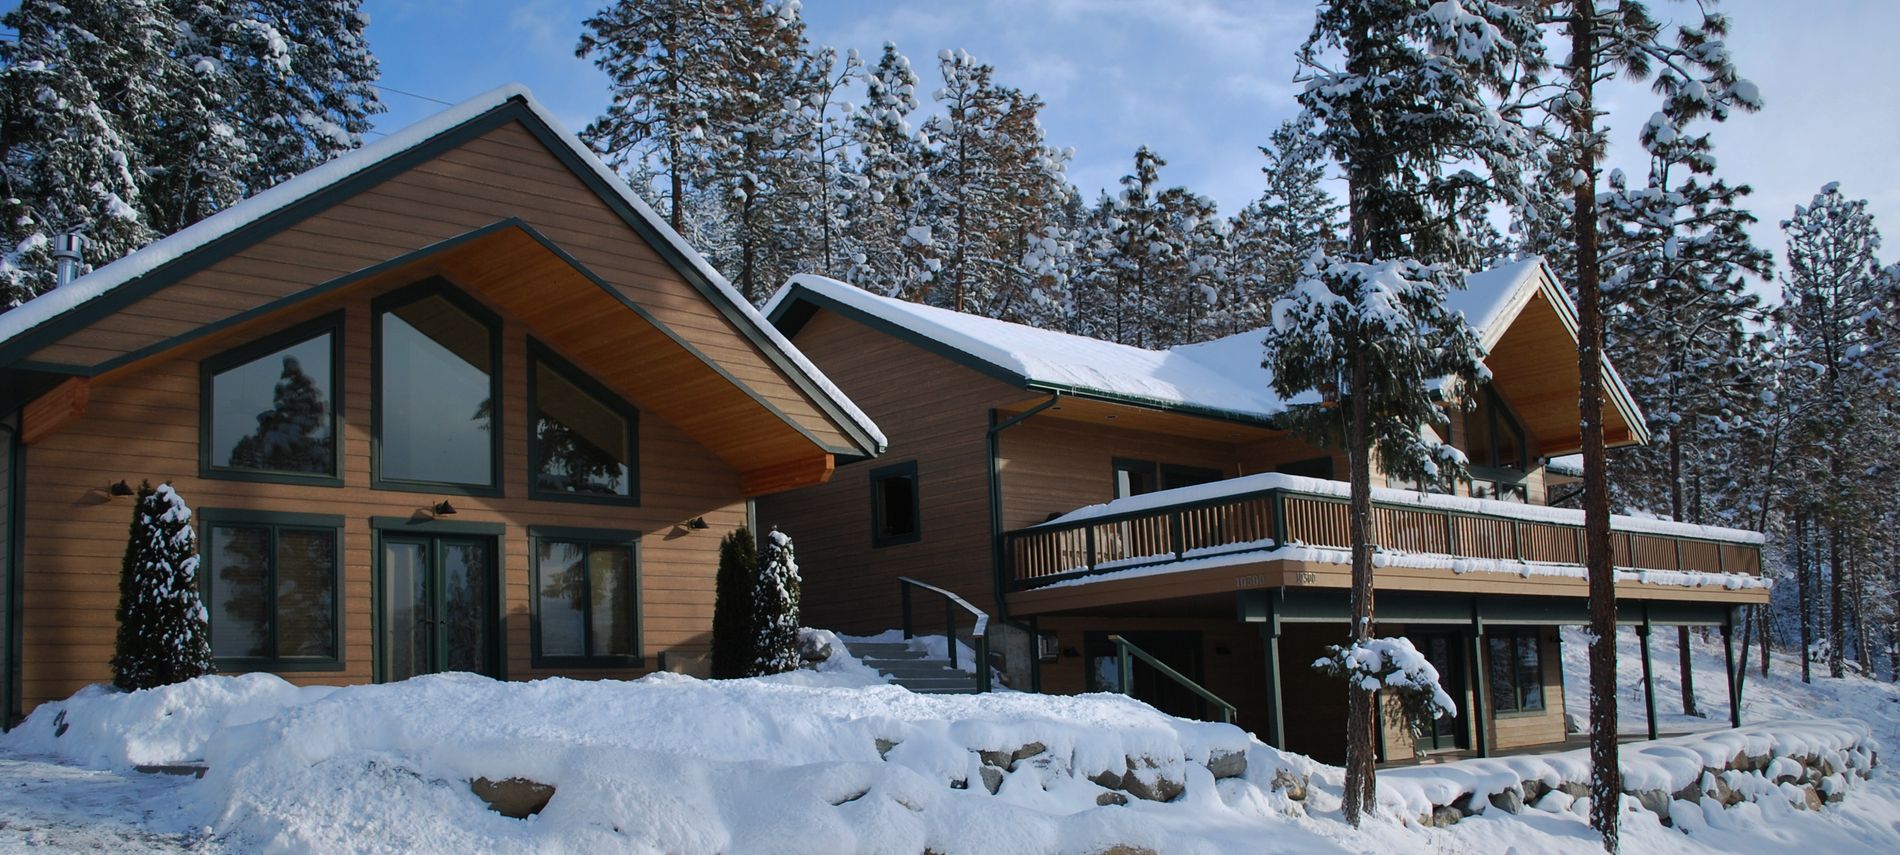 Exterior view of Inn showing house, deck and trees covered in white snow.